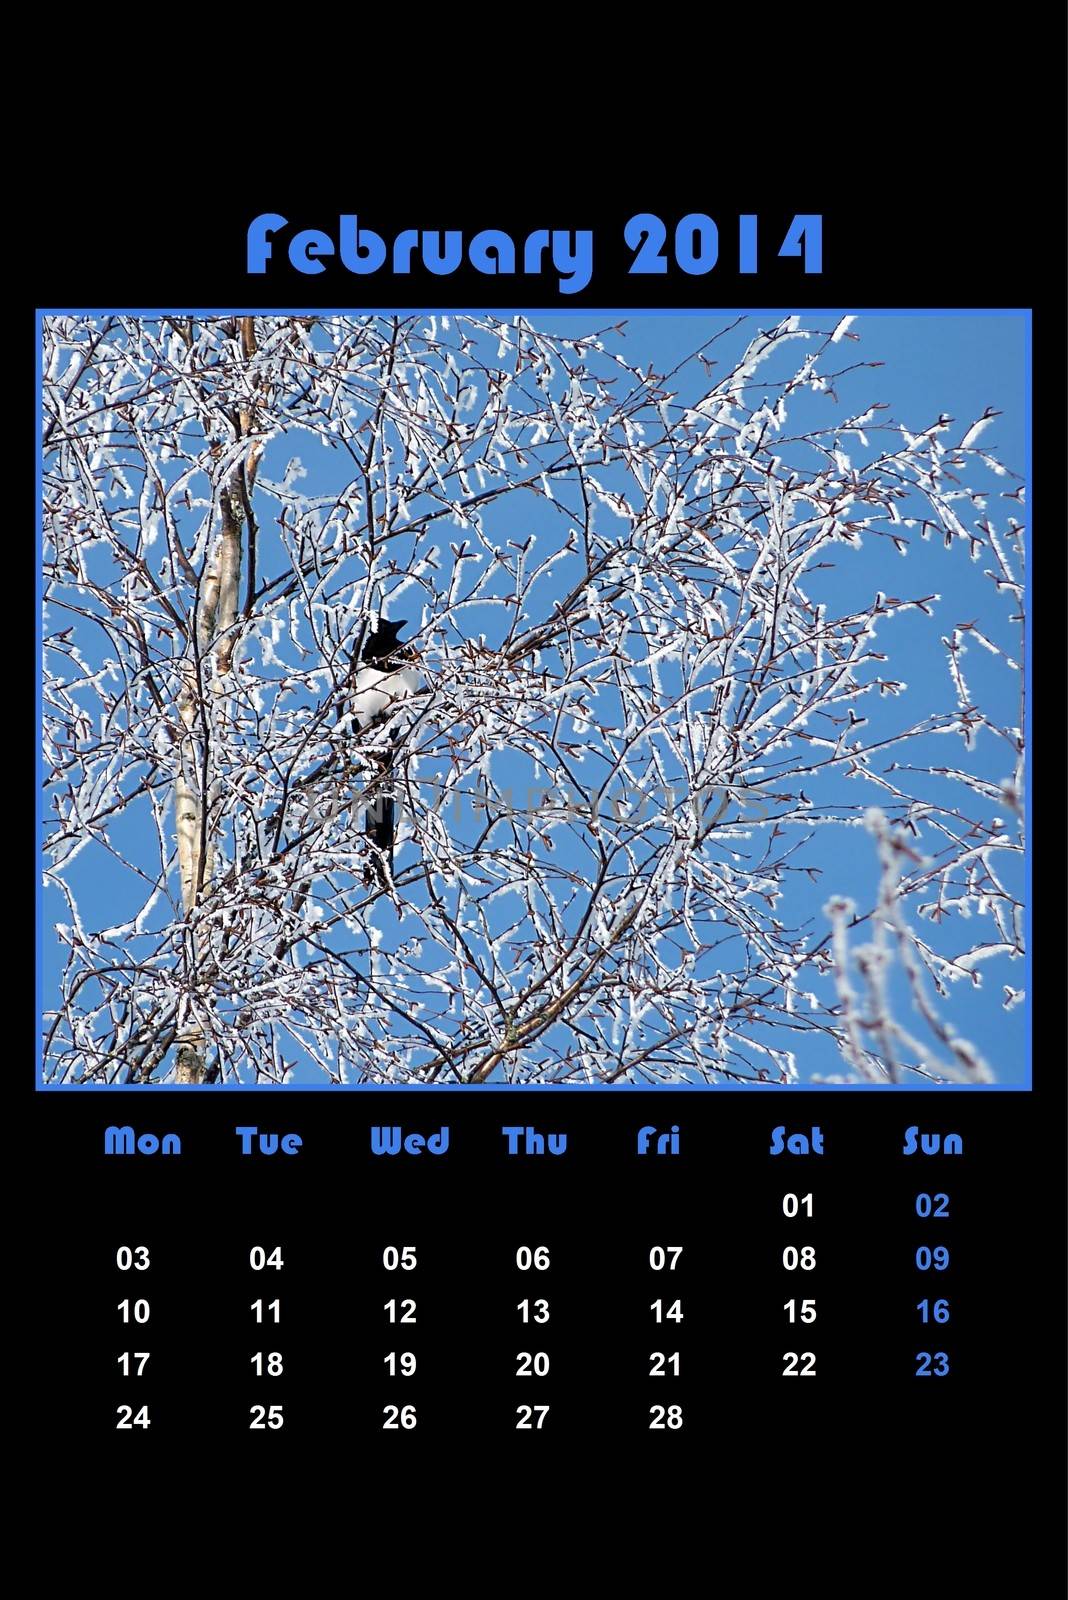 Colorful english calendar for february 2014 in black background, frozen branches and magpie